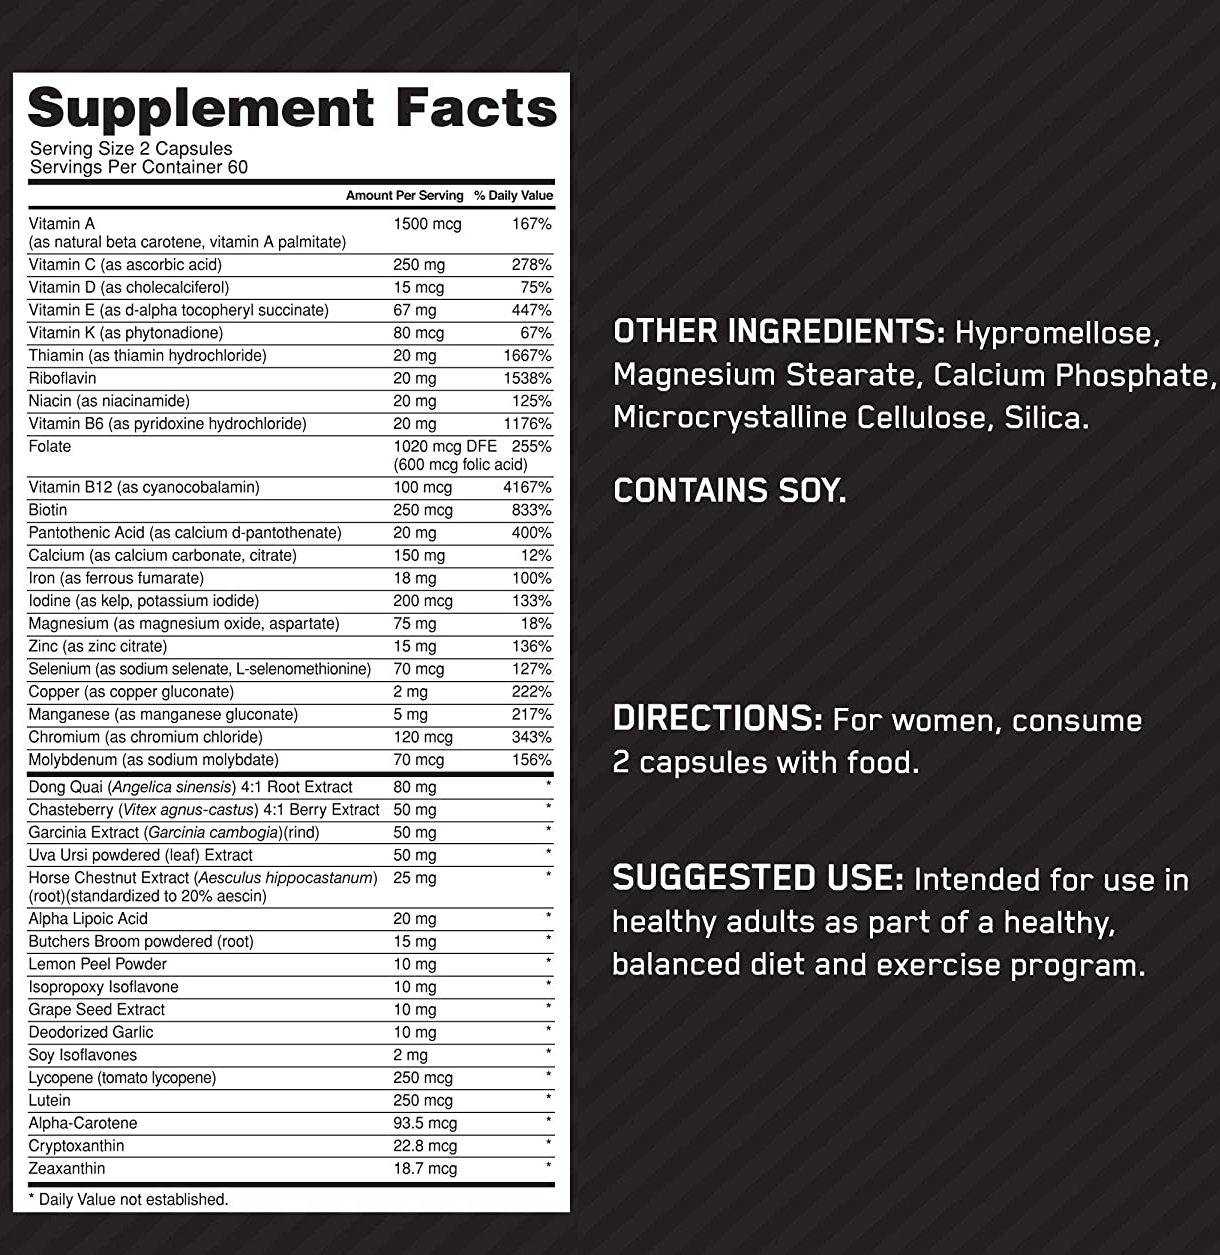 Supplement facts for a 60-capsule container. Daily vitamins and minerals listed with percentages, advice for consumption, and additional ingredients.